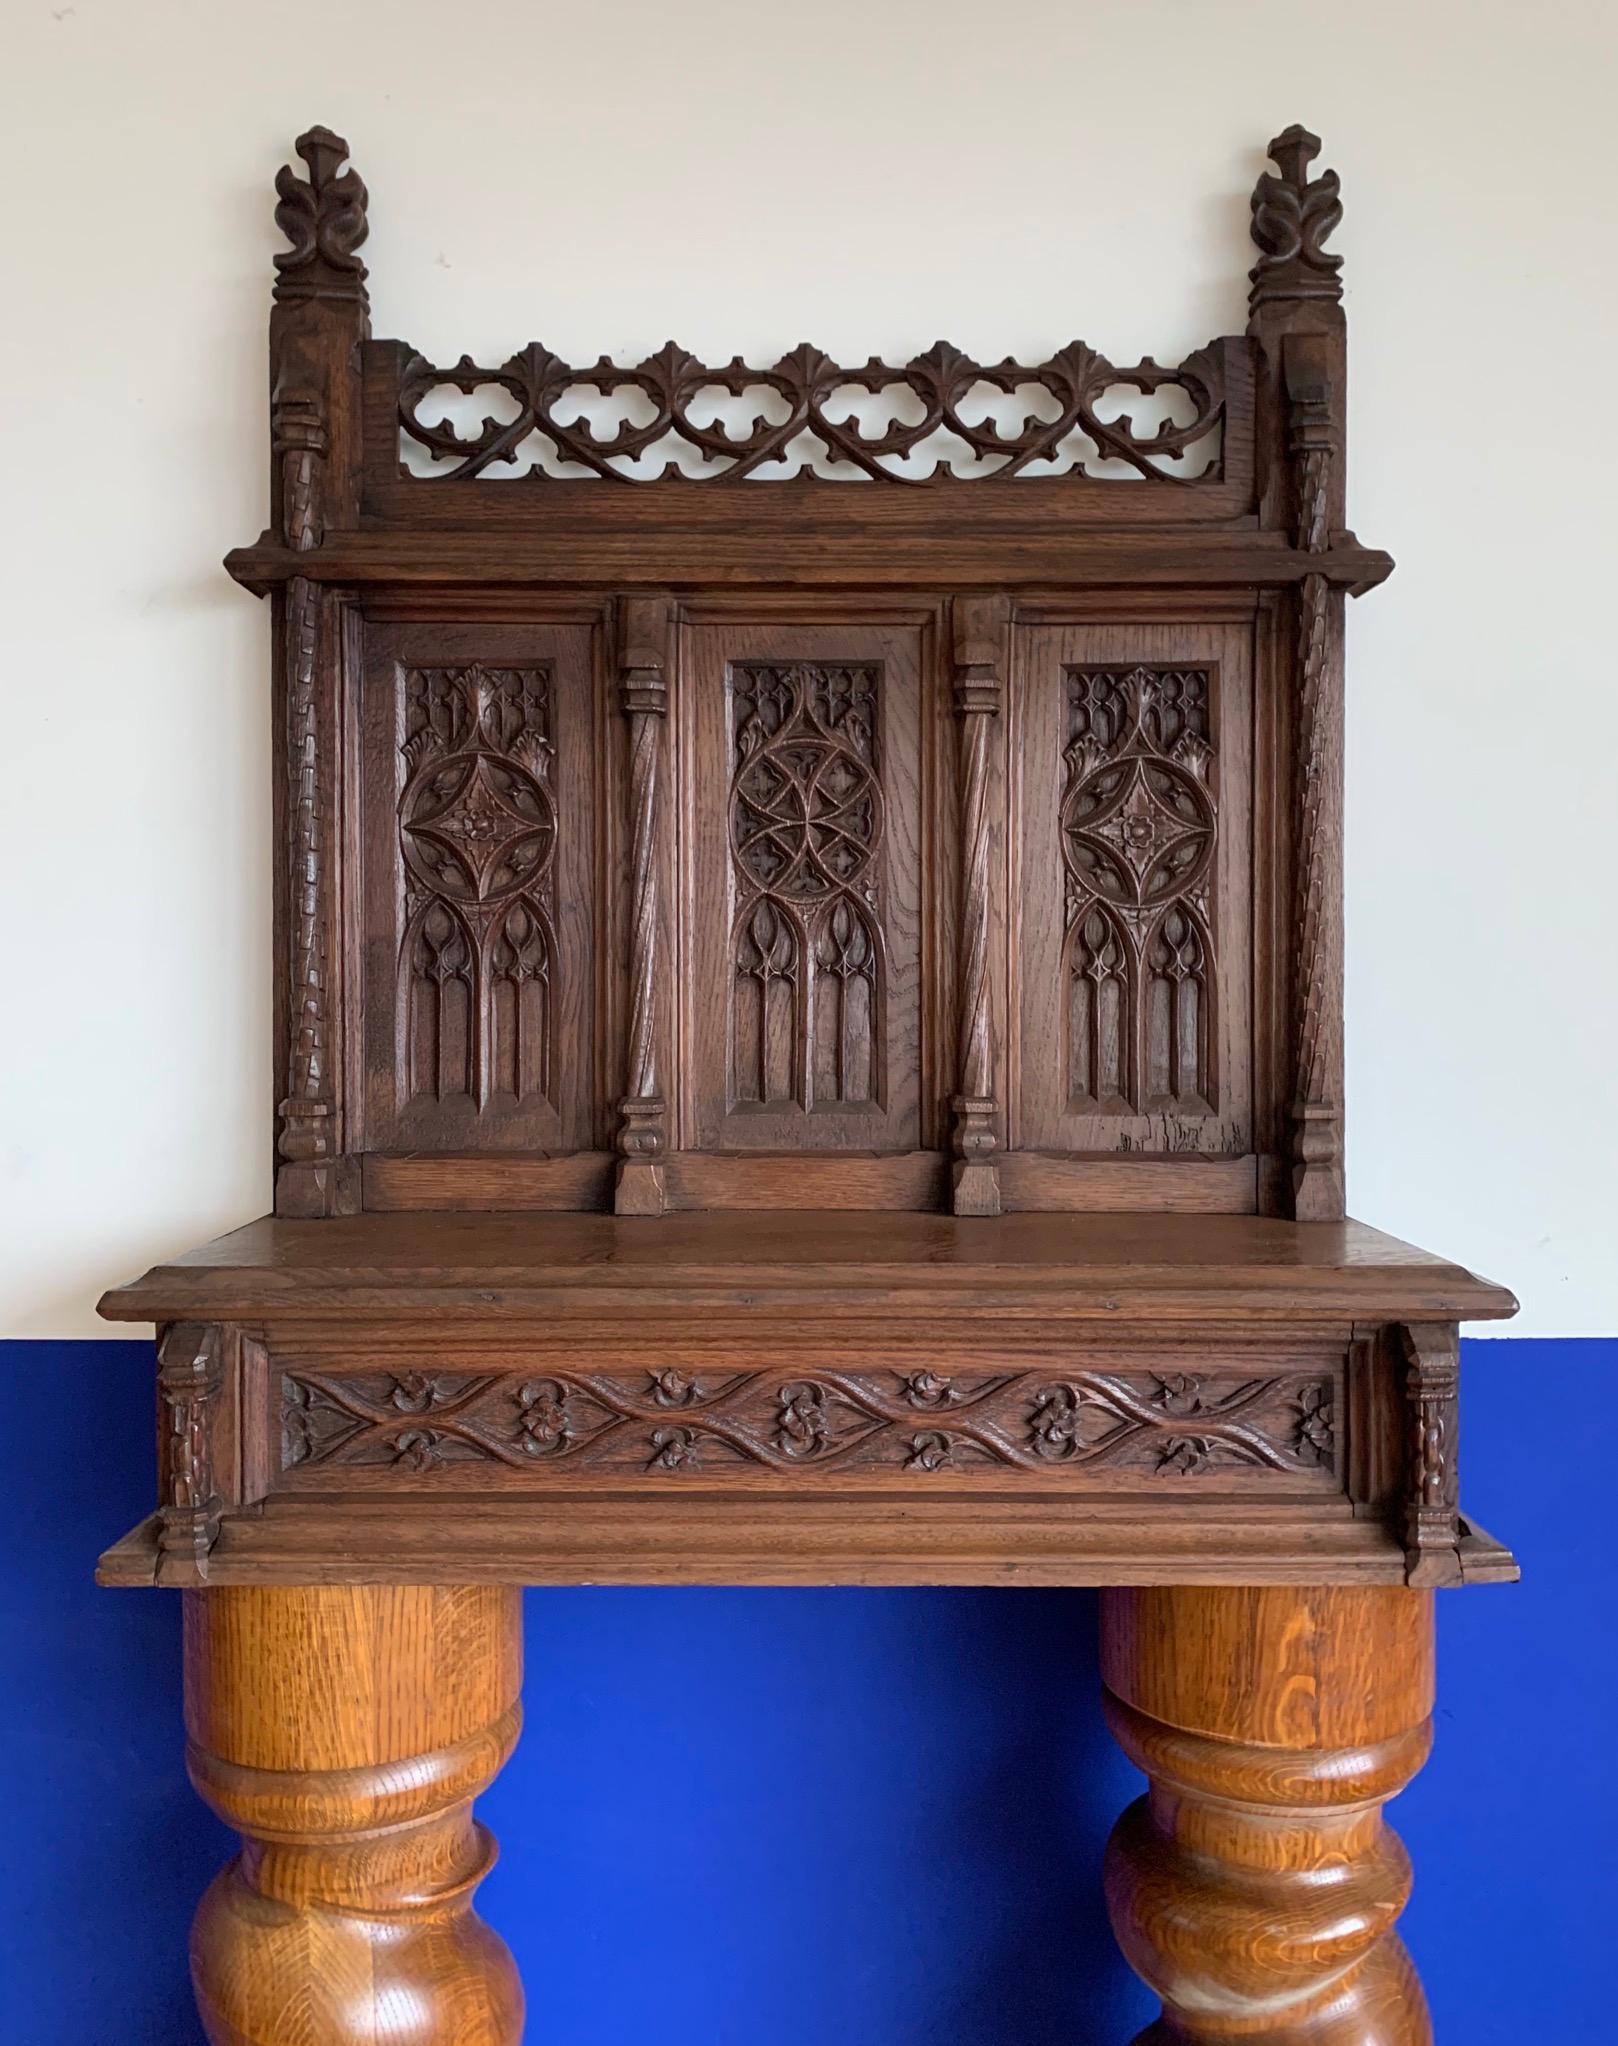 Top quality carved Gothic wall bracket that can also be placed on a table. 

If you are looking for rare and stylish antiques in the Gothic style then this 19th century piece of top quality workmanship could be yours to enjoy soon. The details in